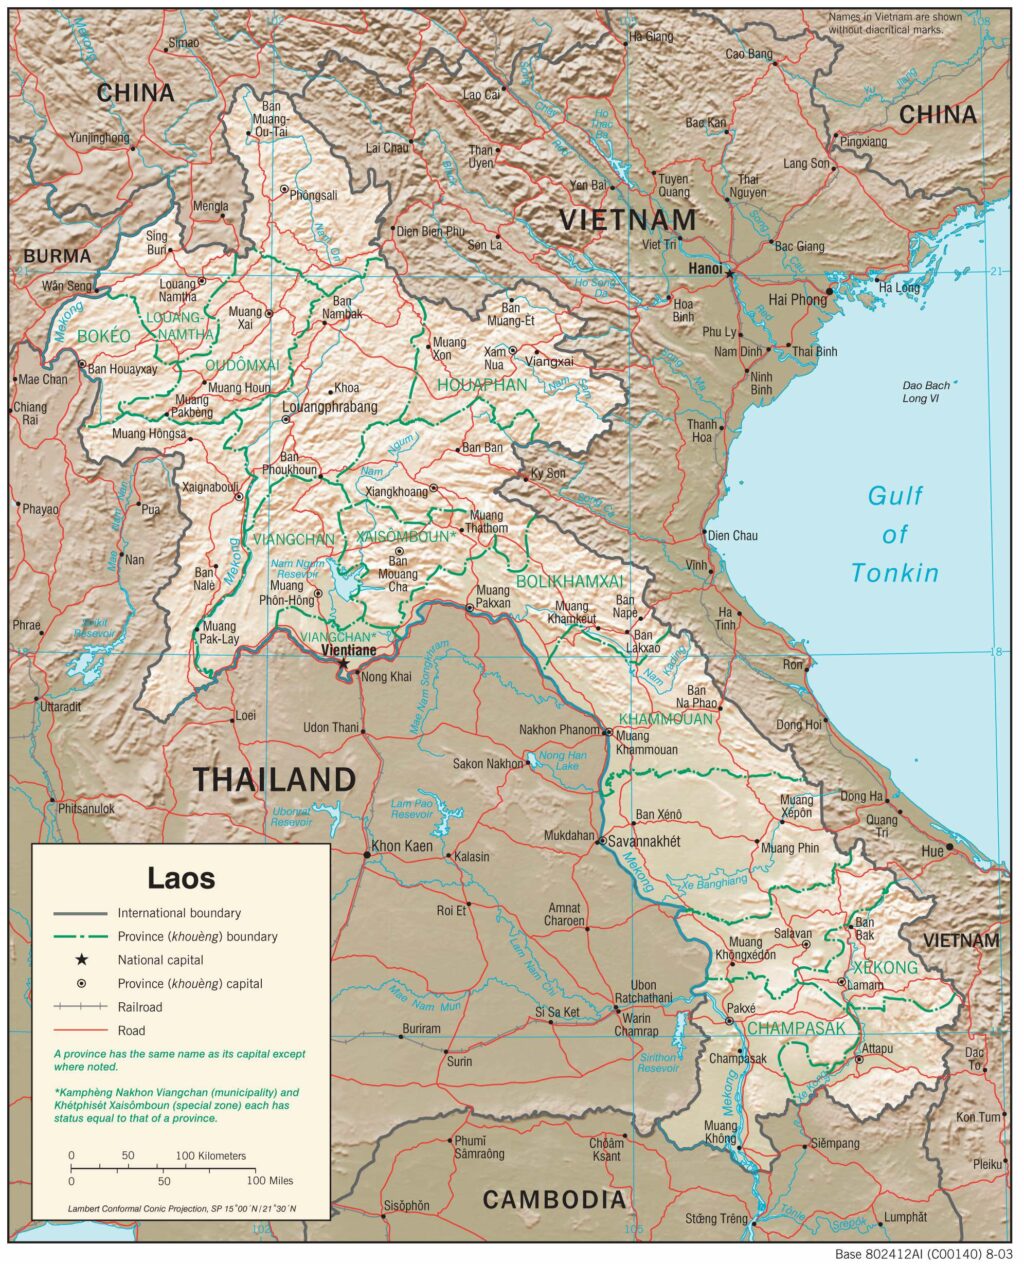 Laos physiography map.